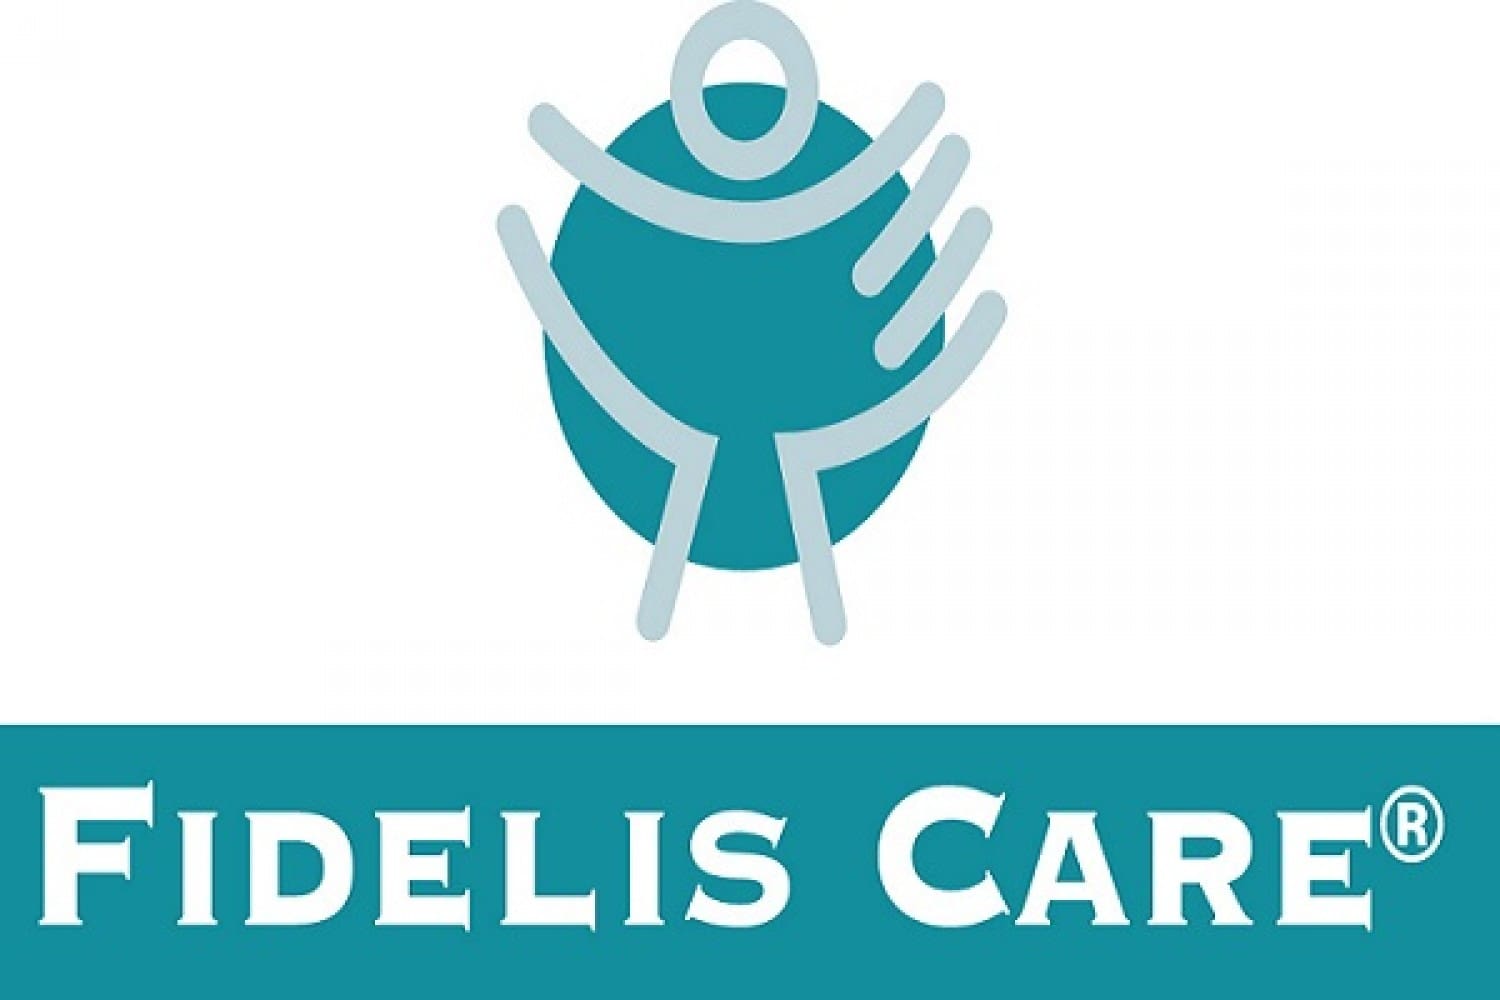 A blue and white logo of the company fidelis care.